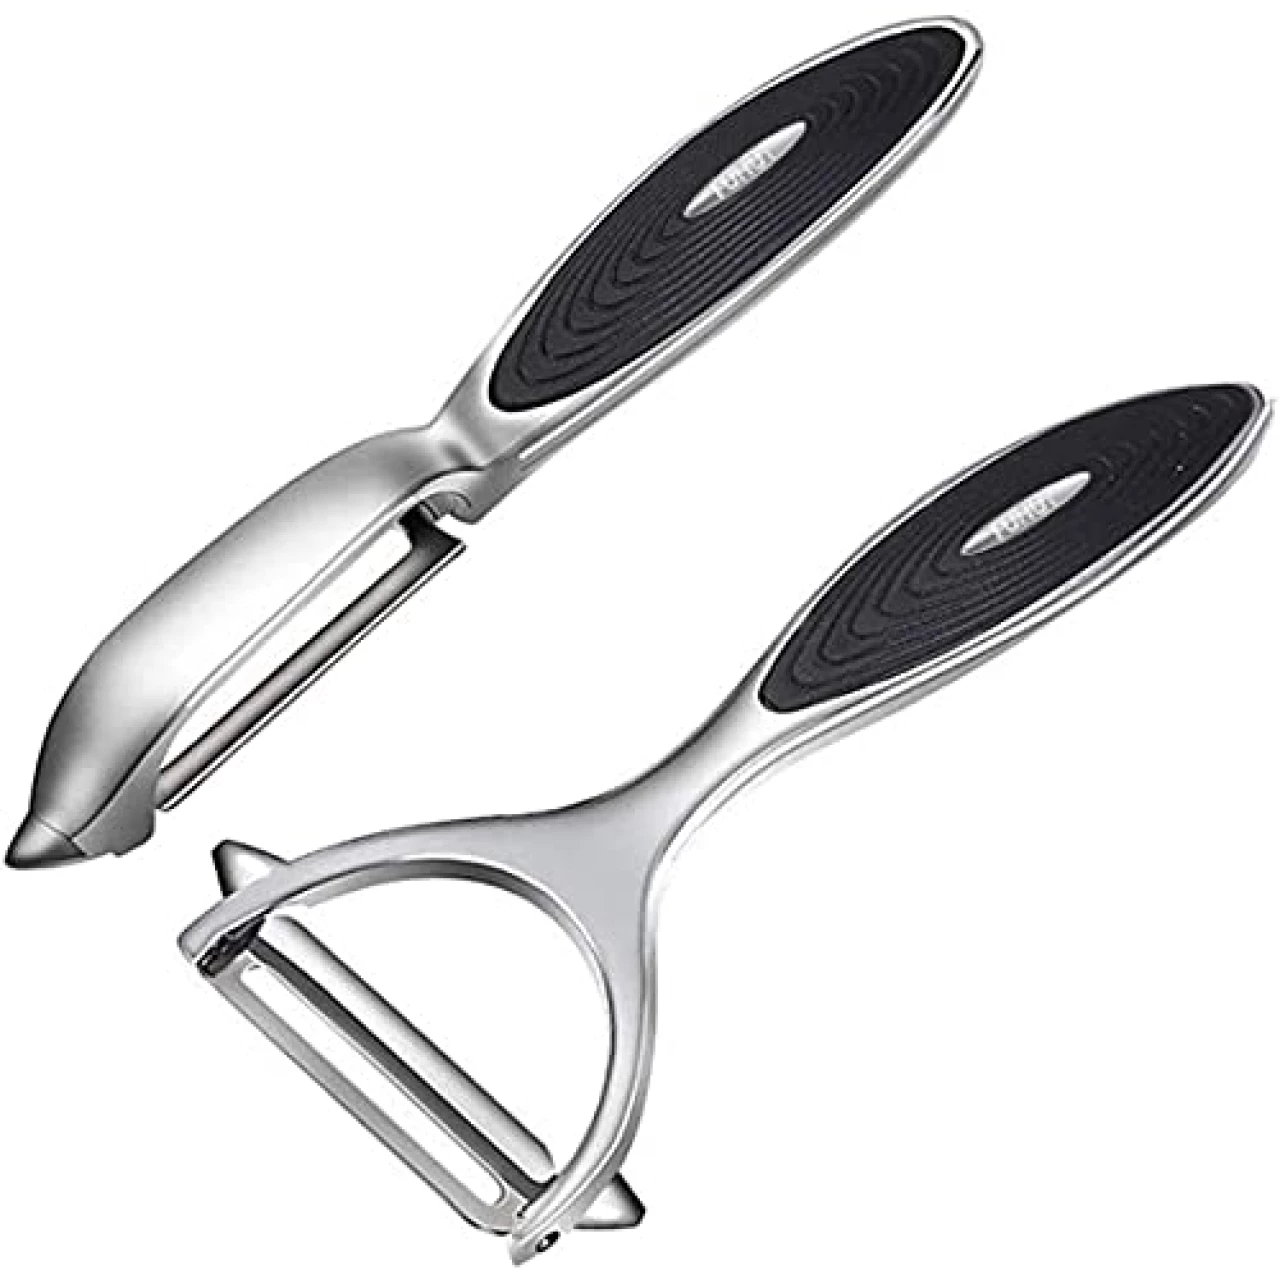 FUHUY Vegetable, Apple Peelers for kitchen, Fruit, Carrot, Veggie, Potatoes Peeler, Y-Shaped and I-Shaped Stainless Steel Peelers, with Ergonomic Non-Slip Handle &amp; Sharp Blade, Good Durable (2PCS)